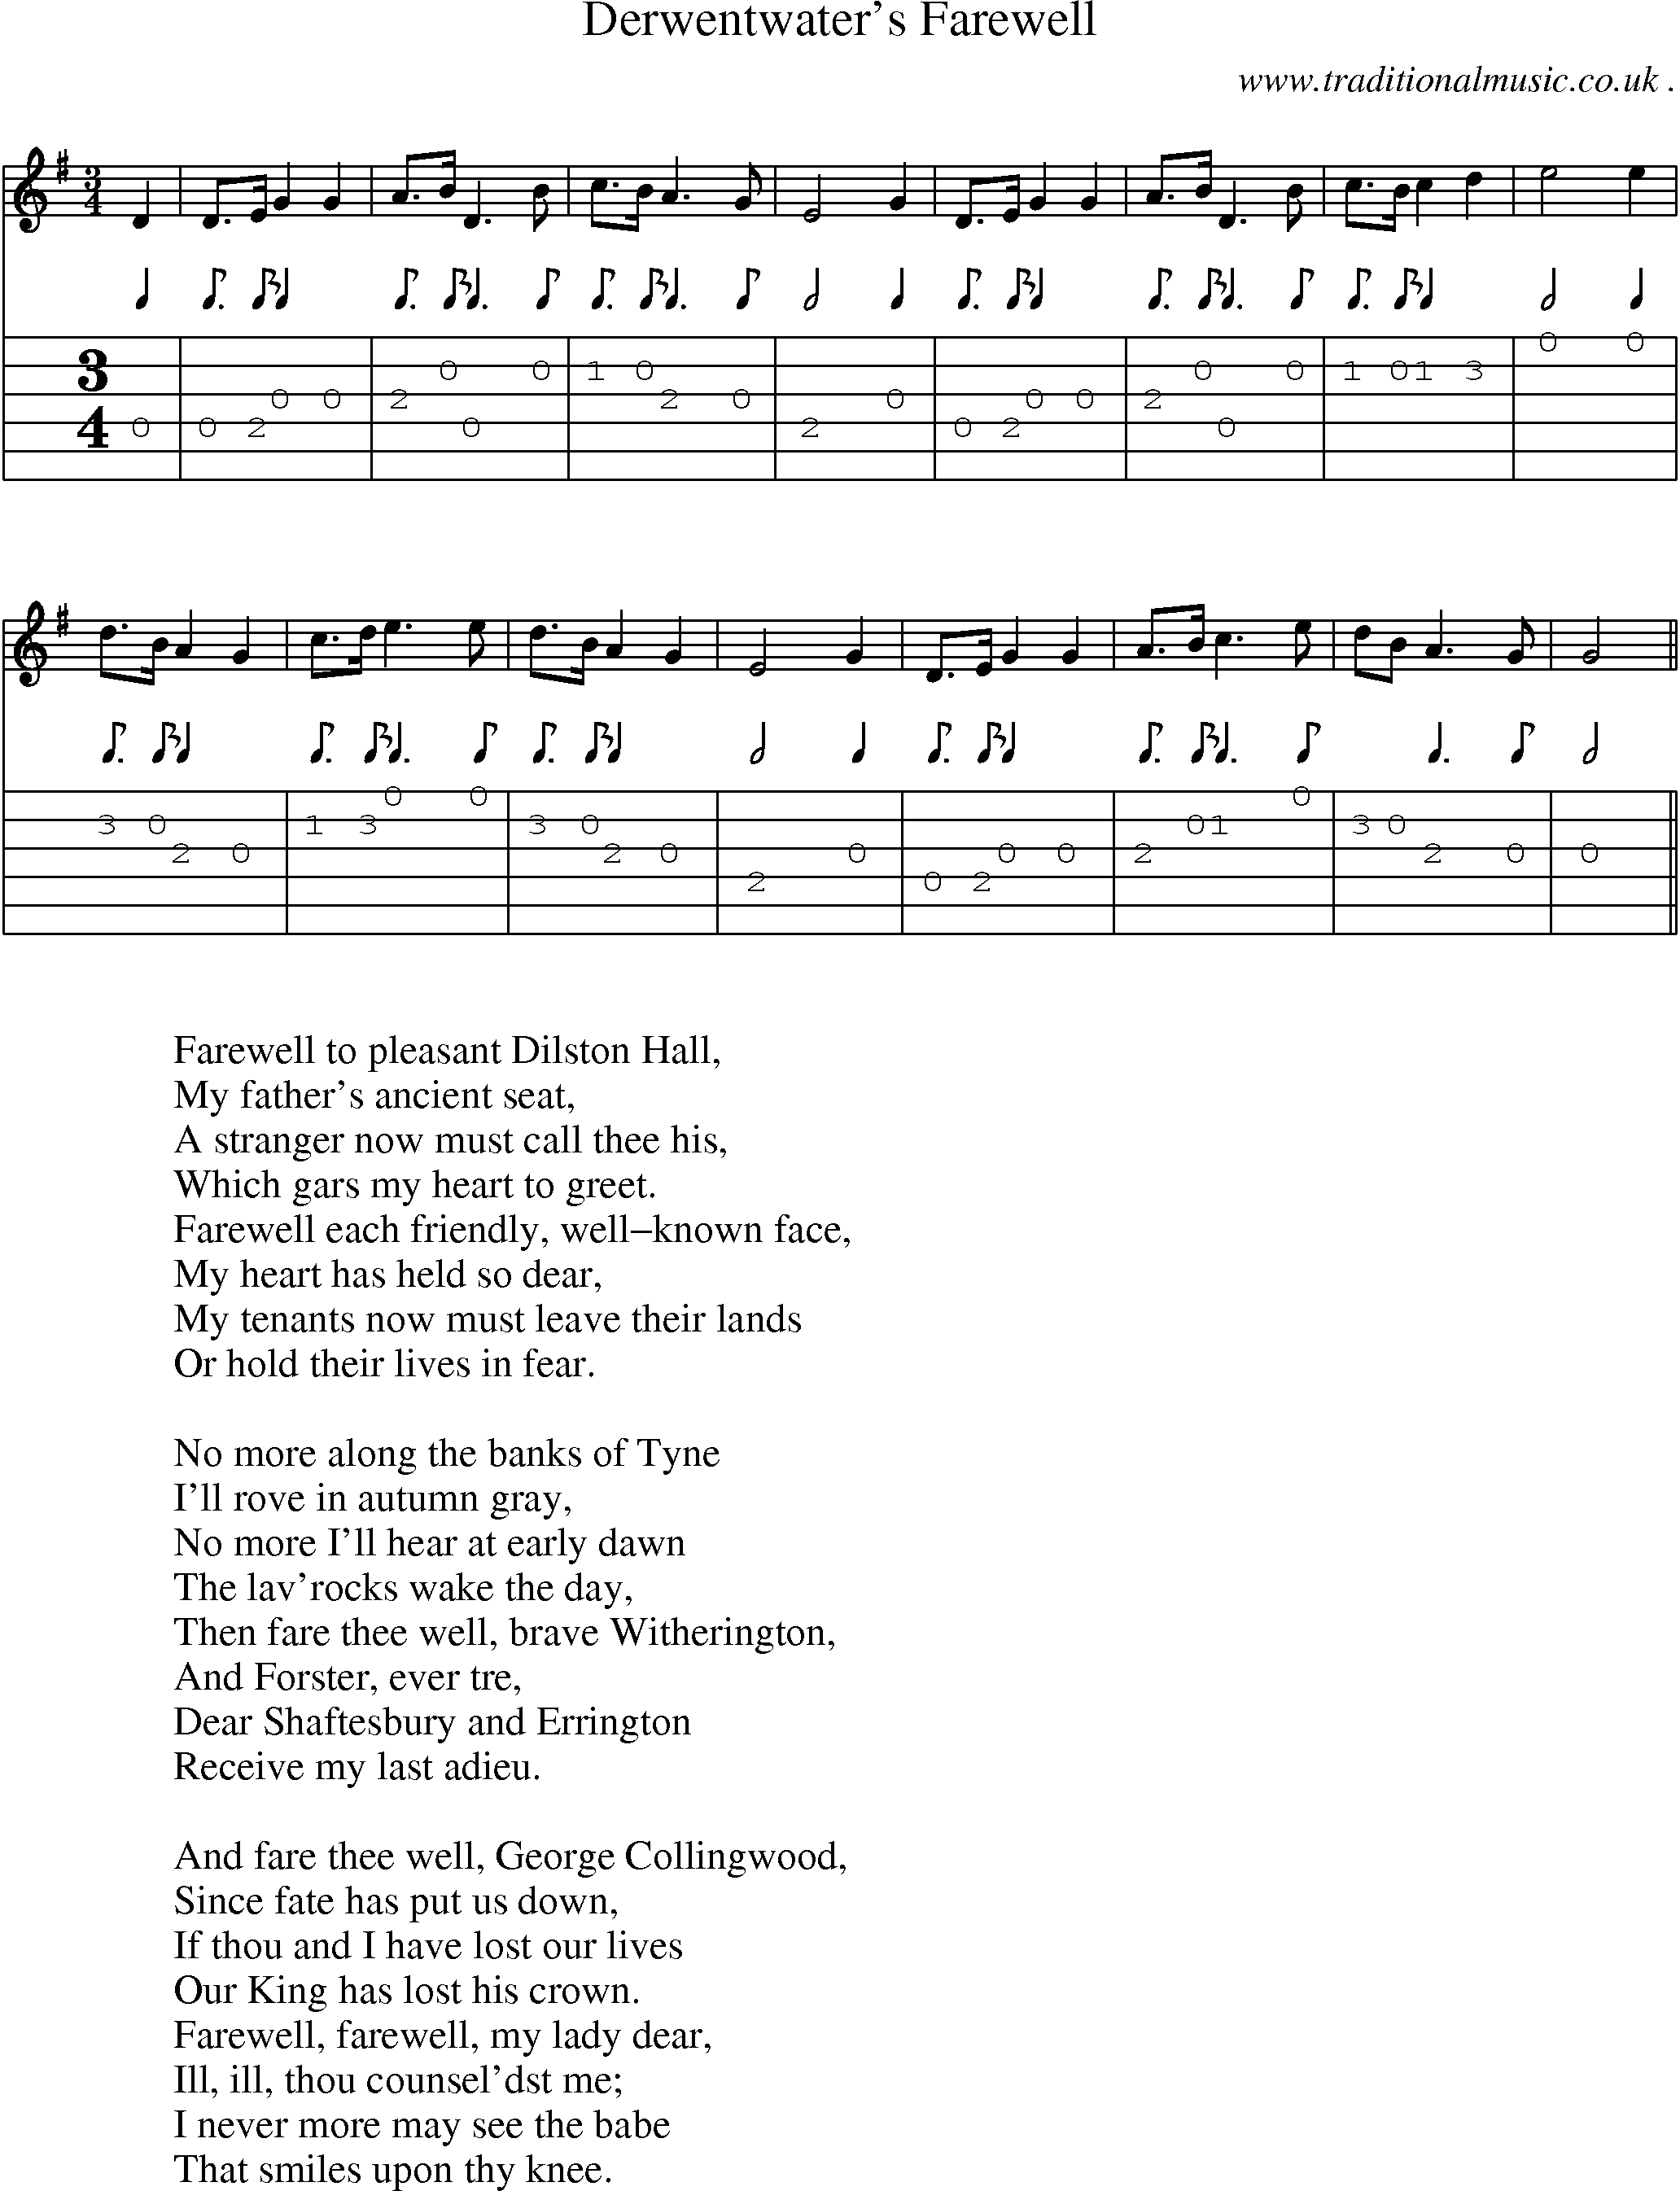 Sheet-Music and Guitar Tabs for Derwentwaters Farewell